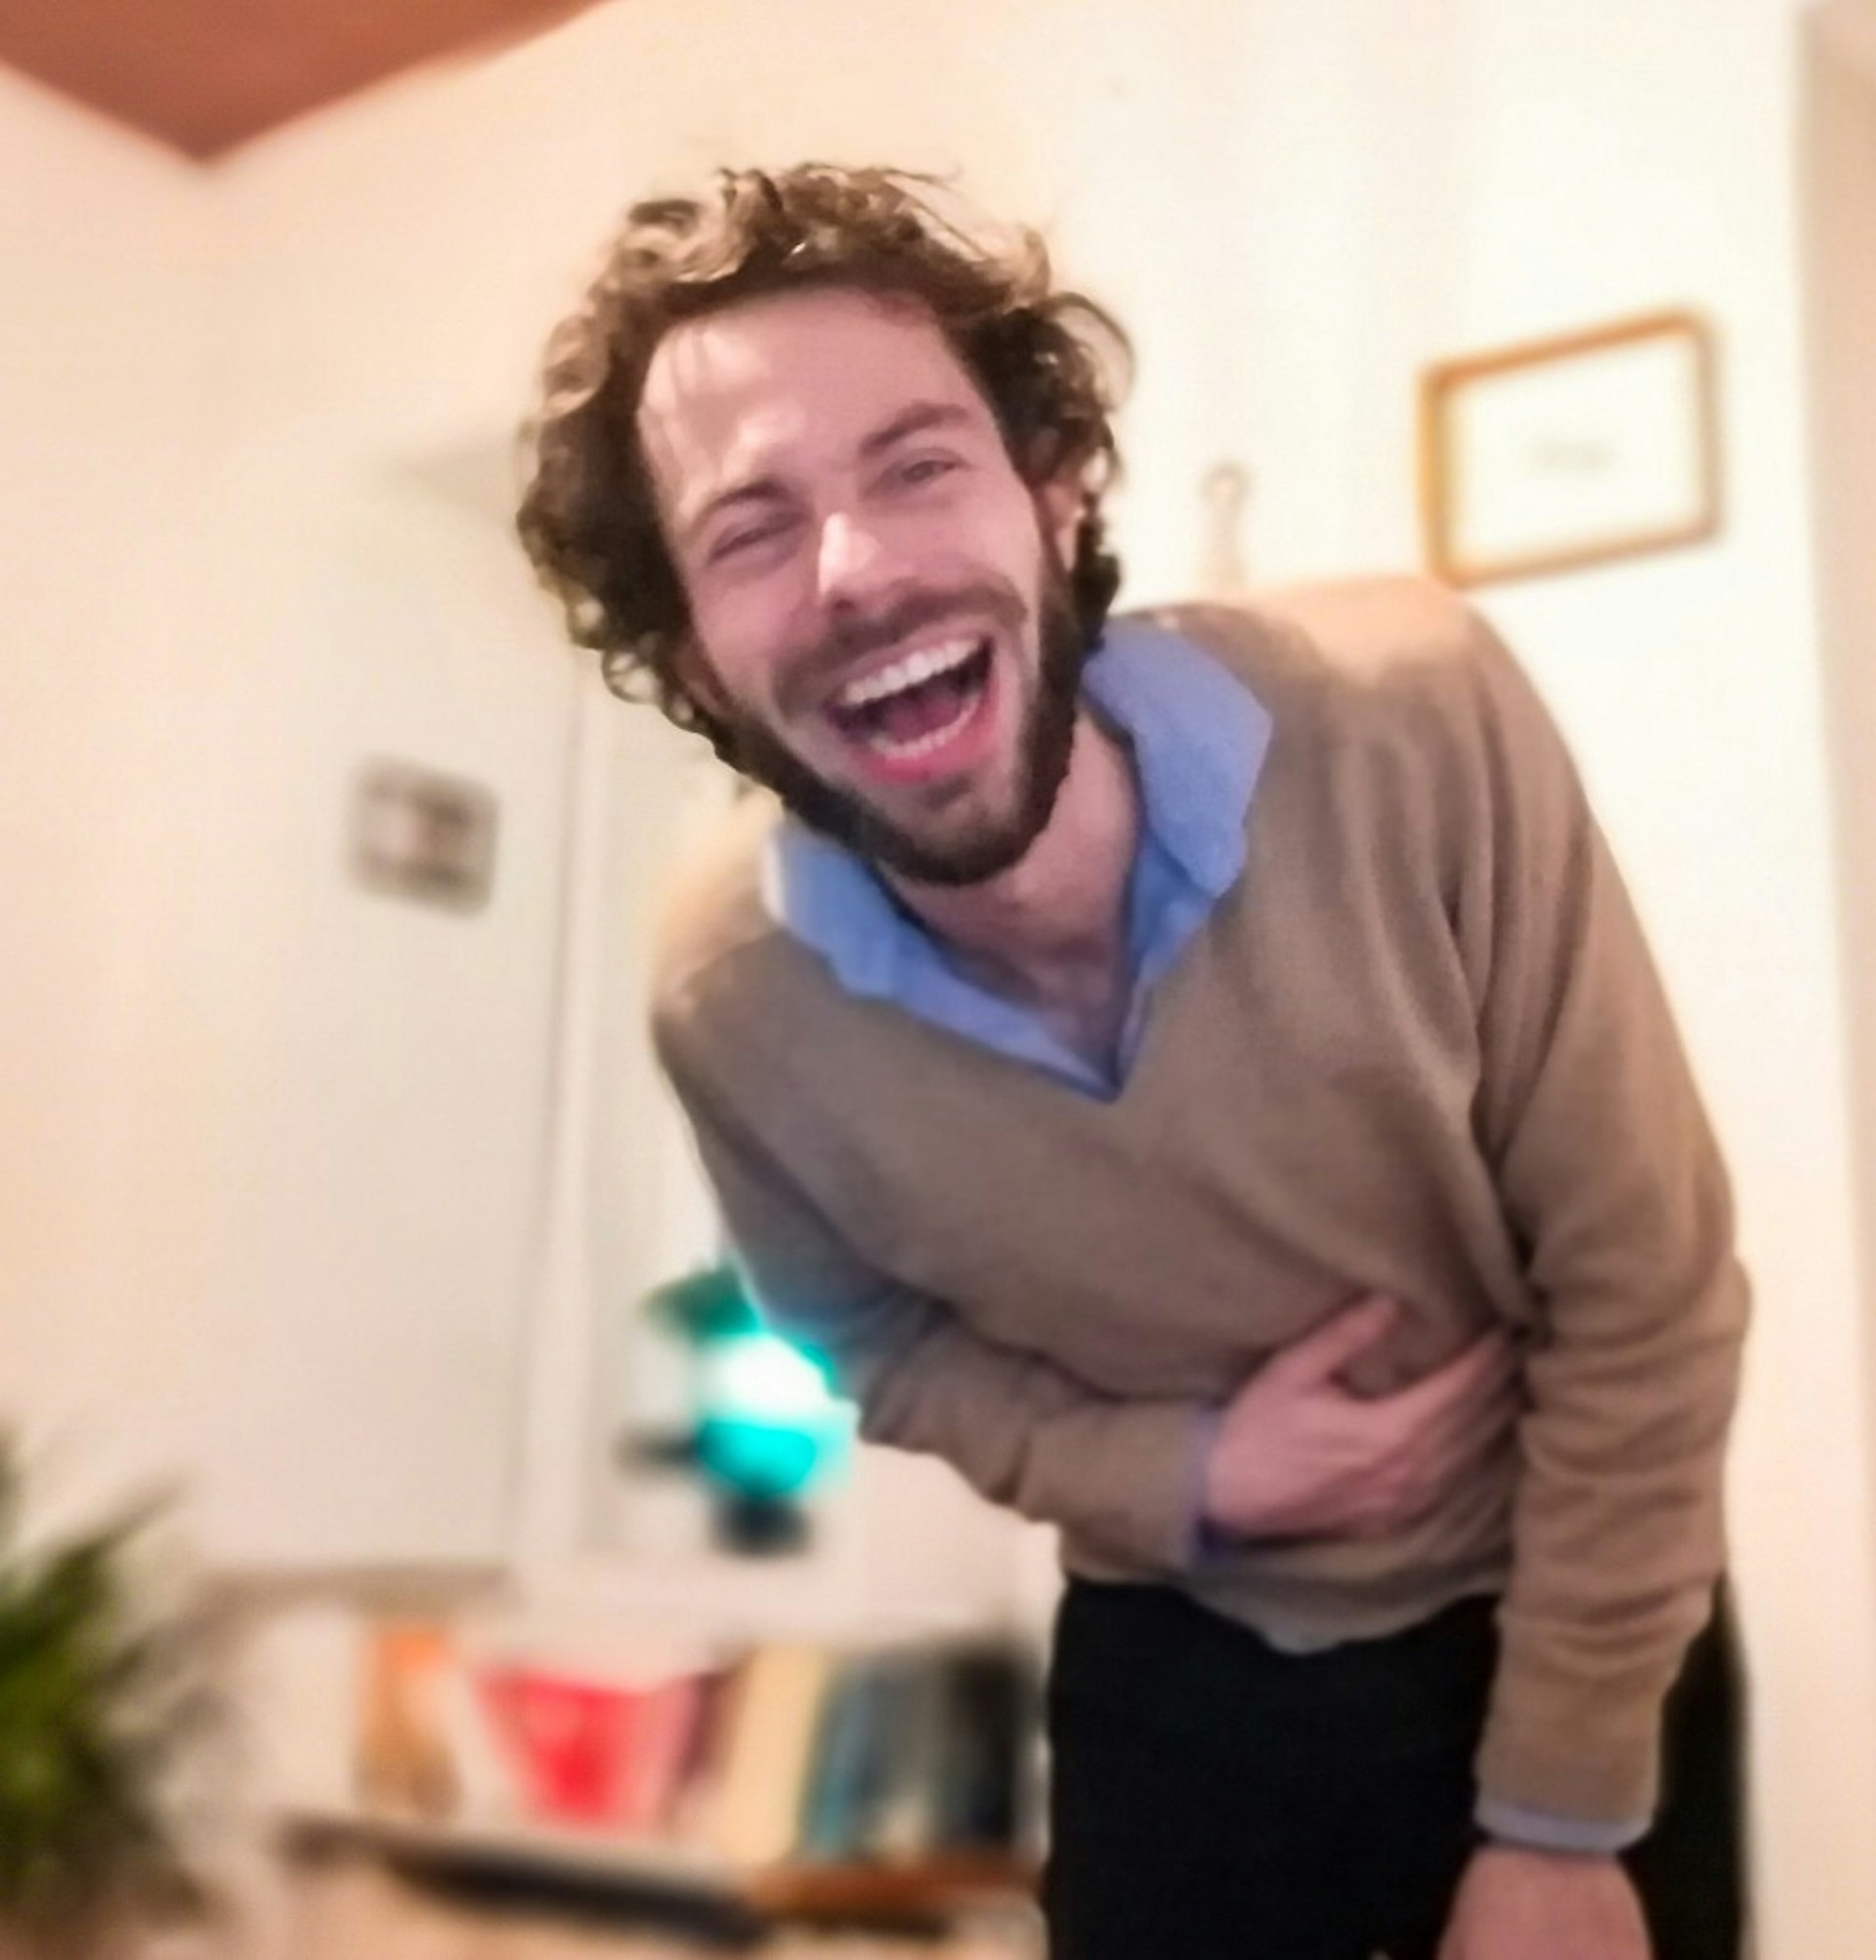 A man in a brown sweater laughing